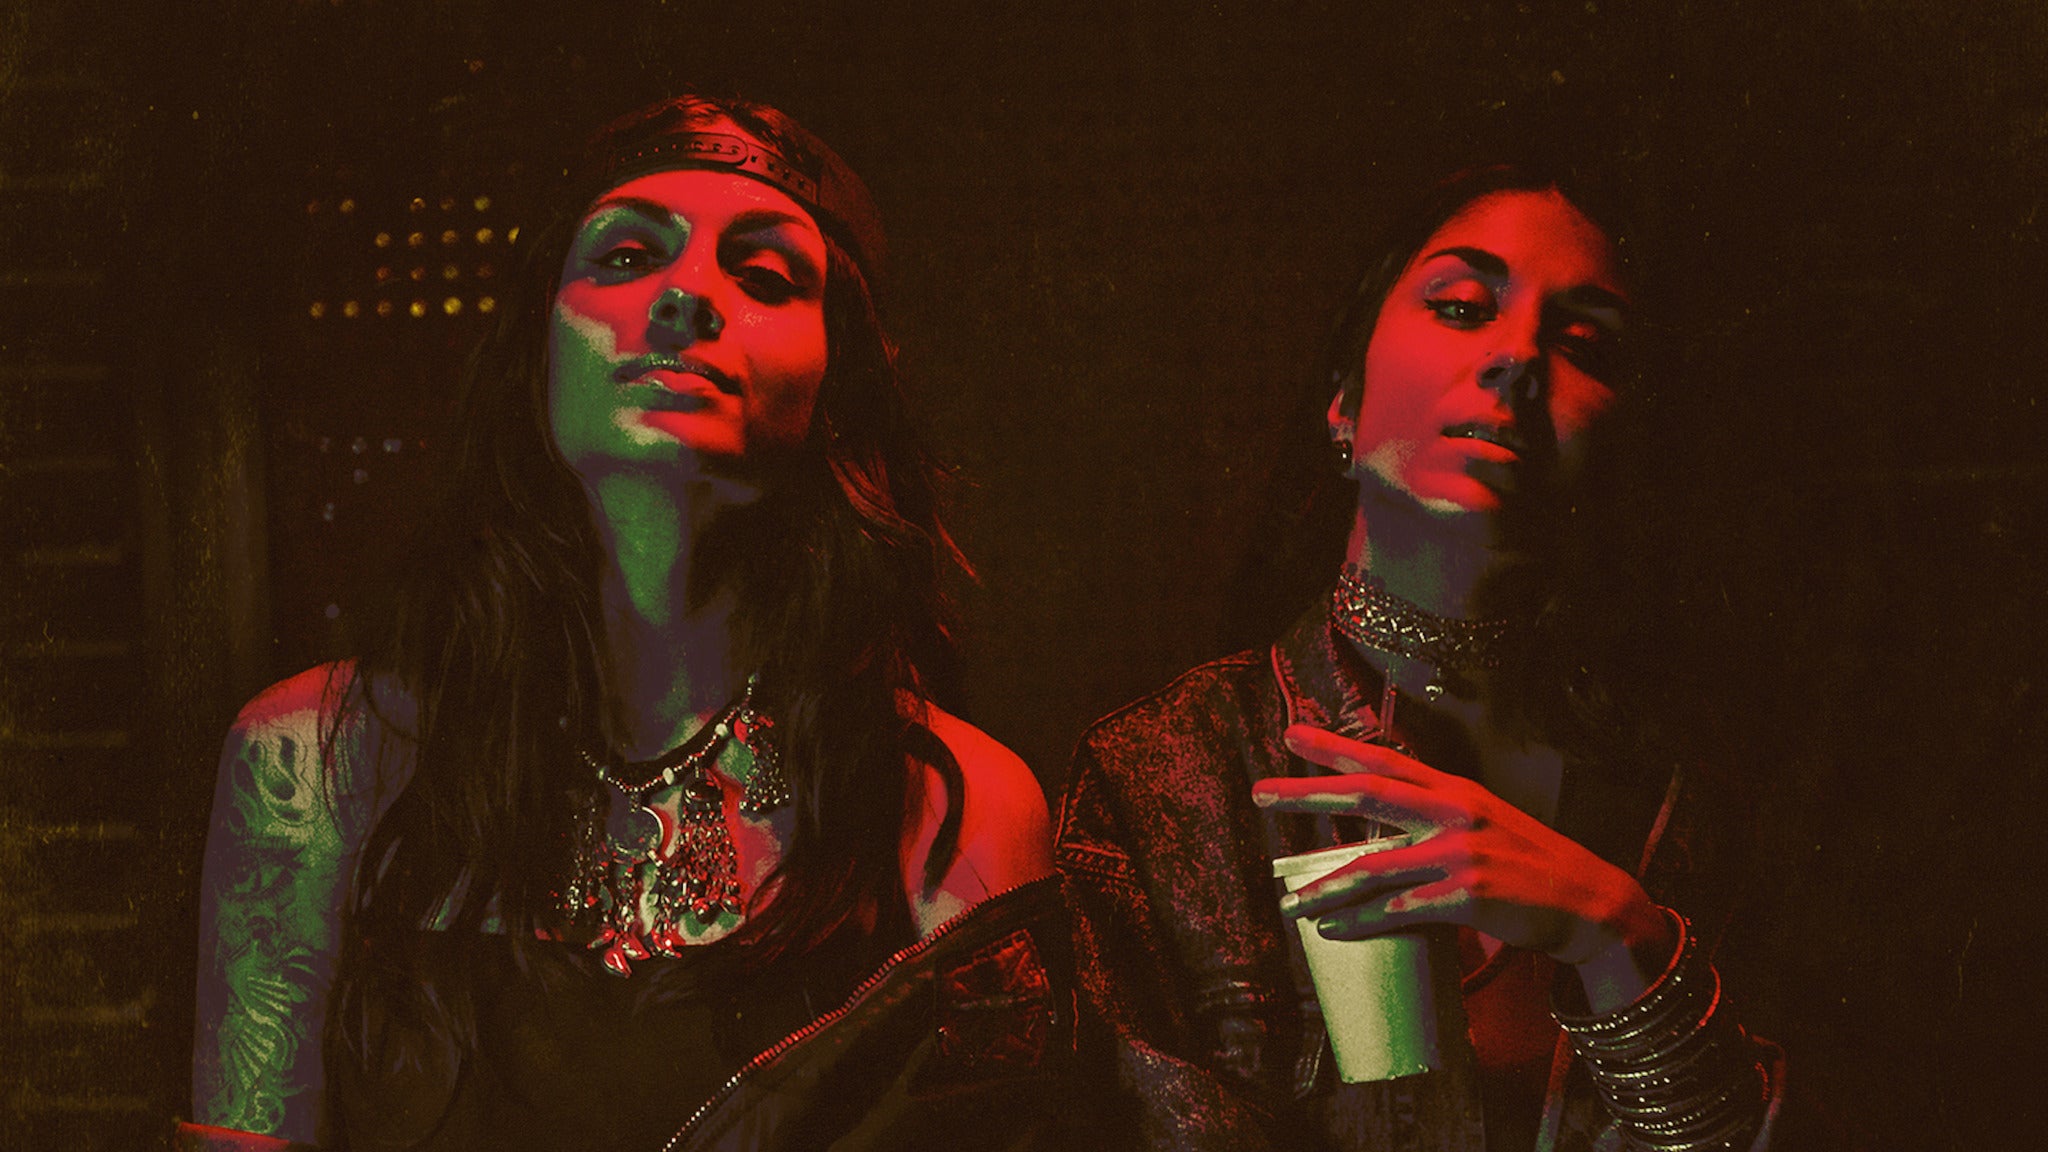 Krewella - New World Tour presented by SiriusXM BPM in St Louis promo photo for Spotify presale offer code